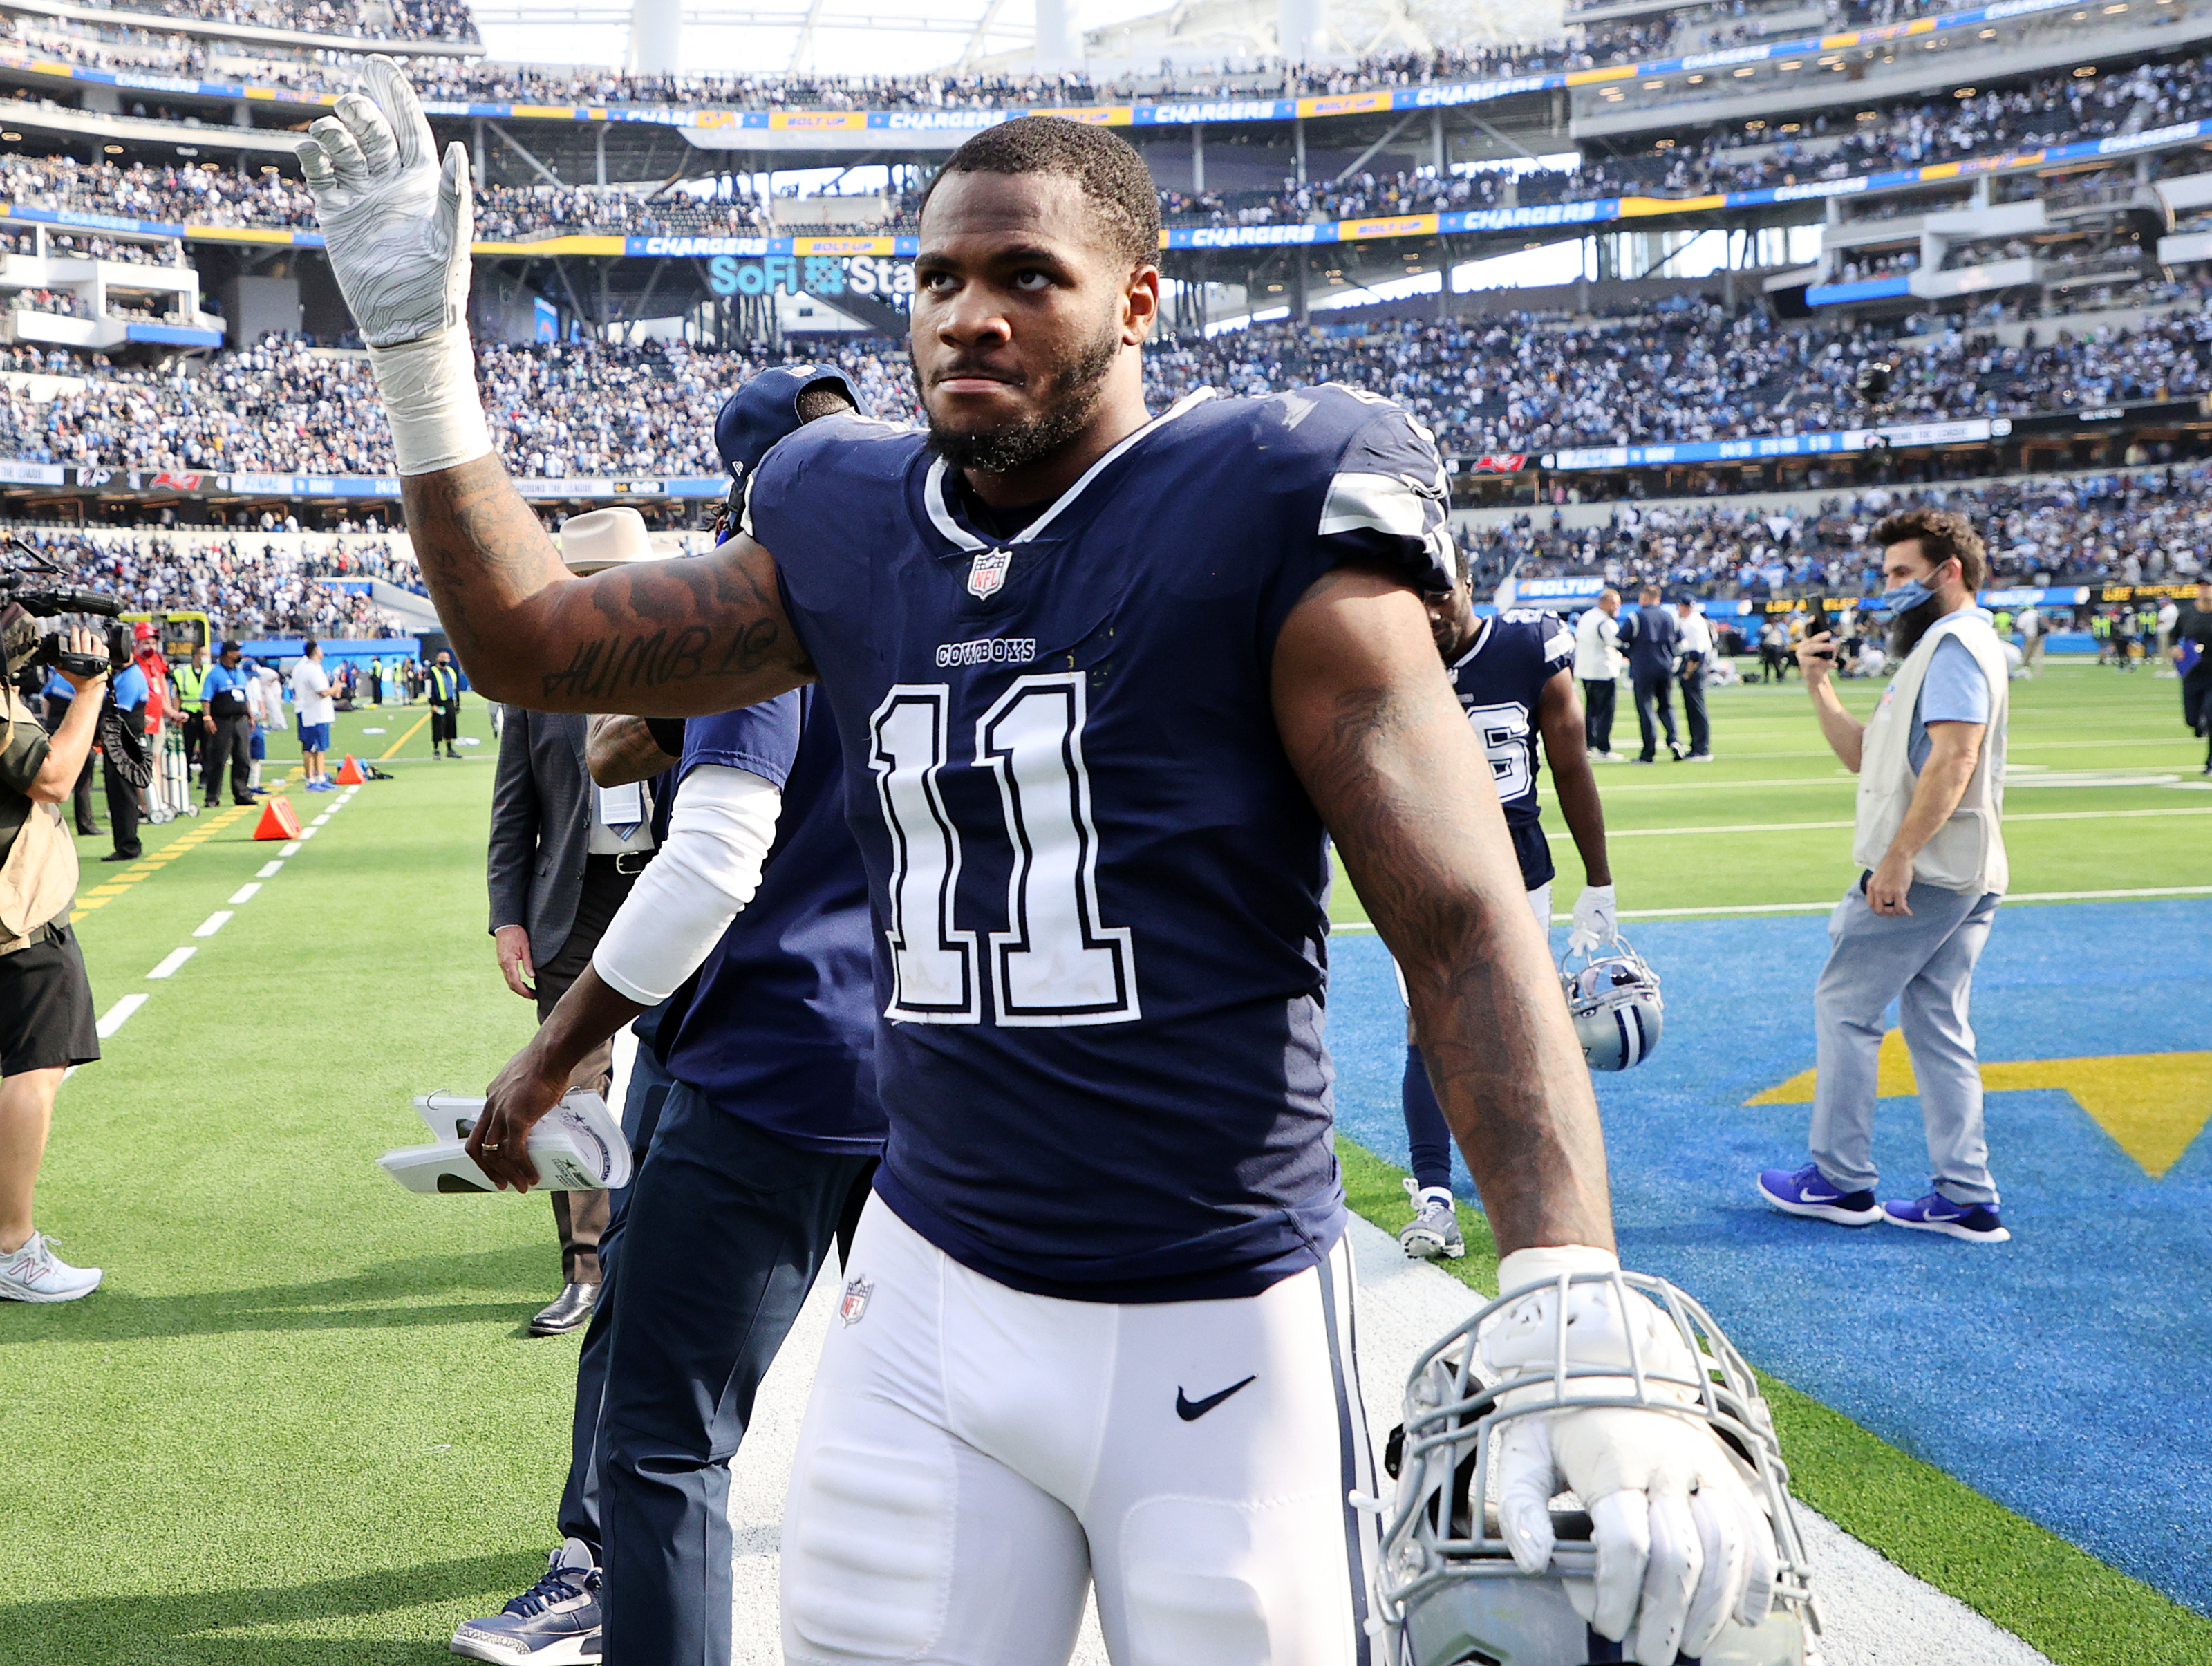 Dallas Cowboys: Micah Parsons dominates on the edge vs. Chargers